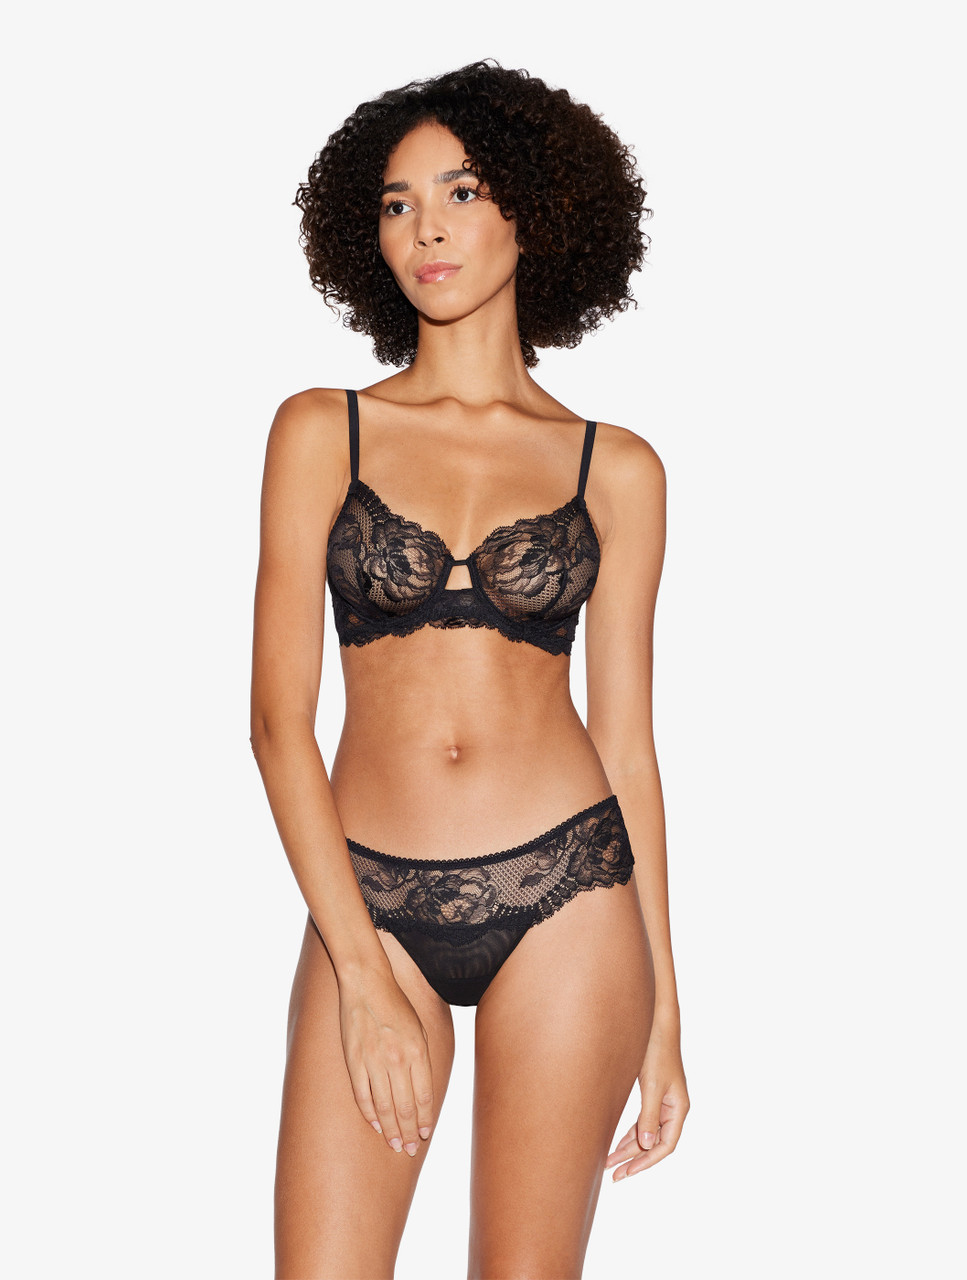 Black lace bra - 43 products